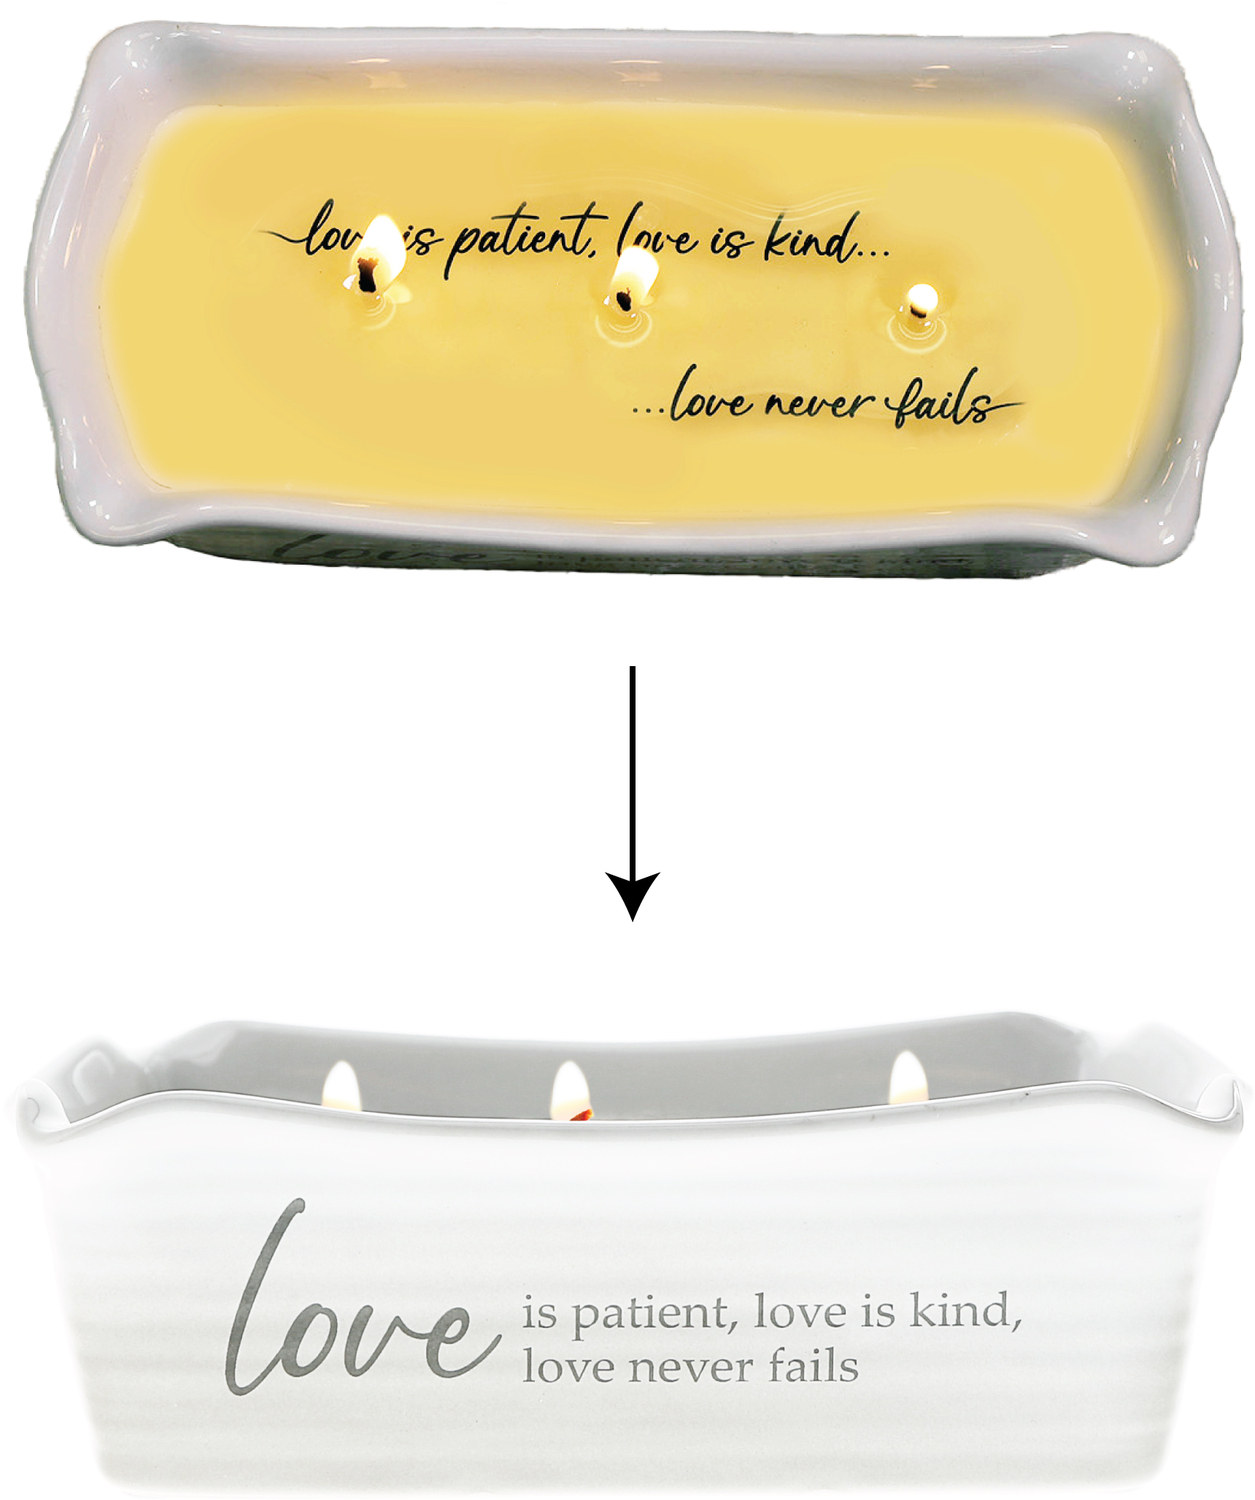 Love by Thoughts of Home - Love - 12 oz - 100% Soy Wax Reveal Triple Wick Candle
Scent: Tranquility